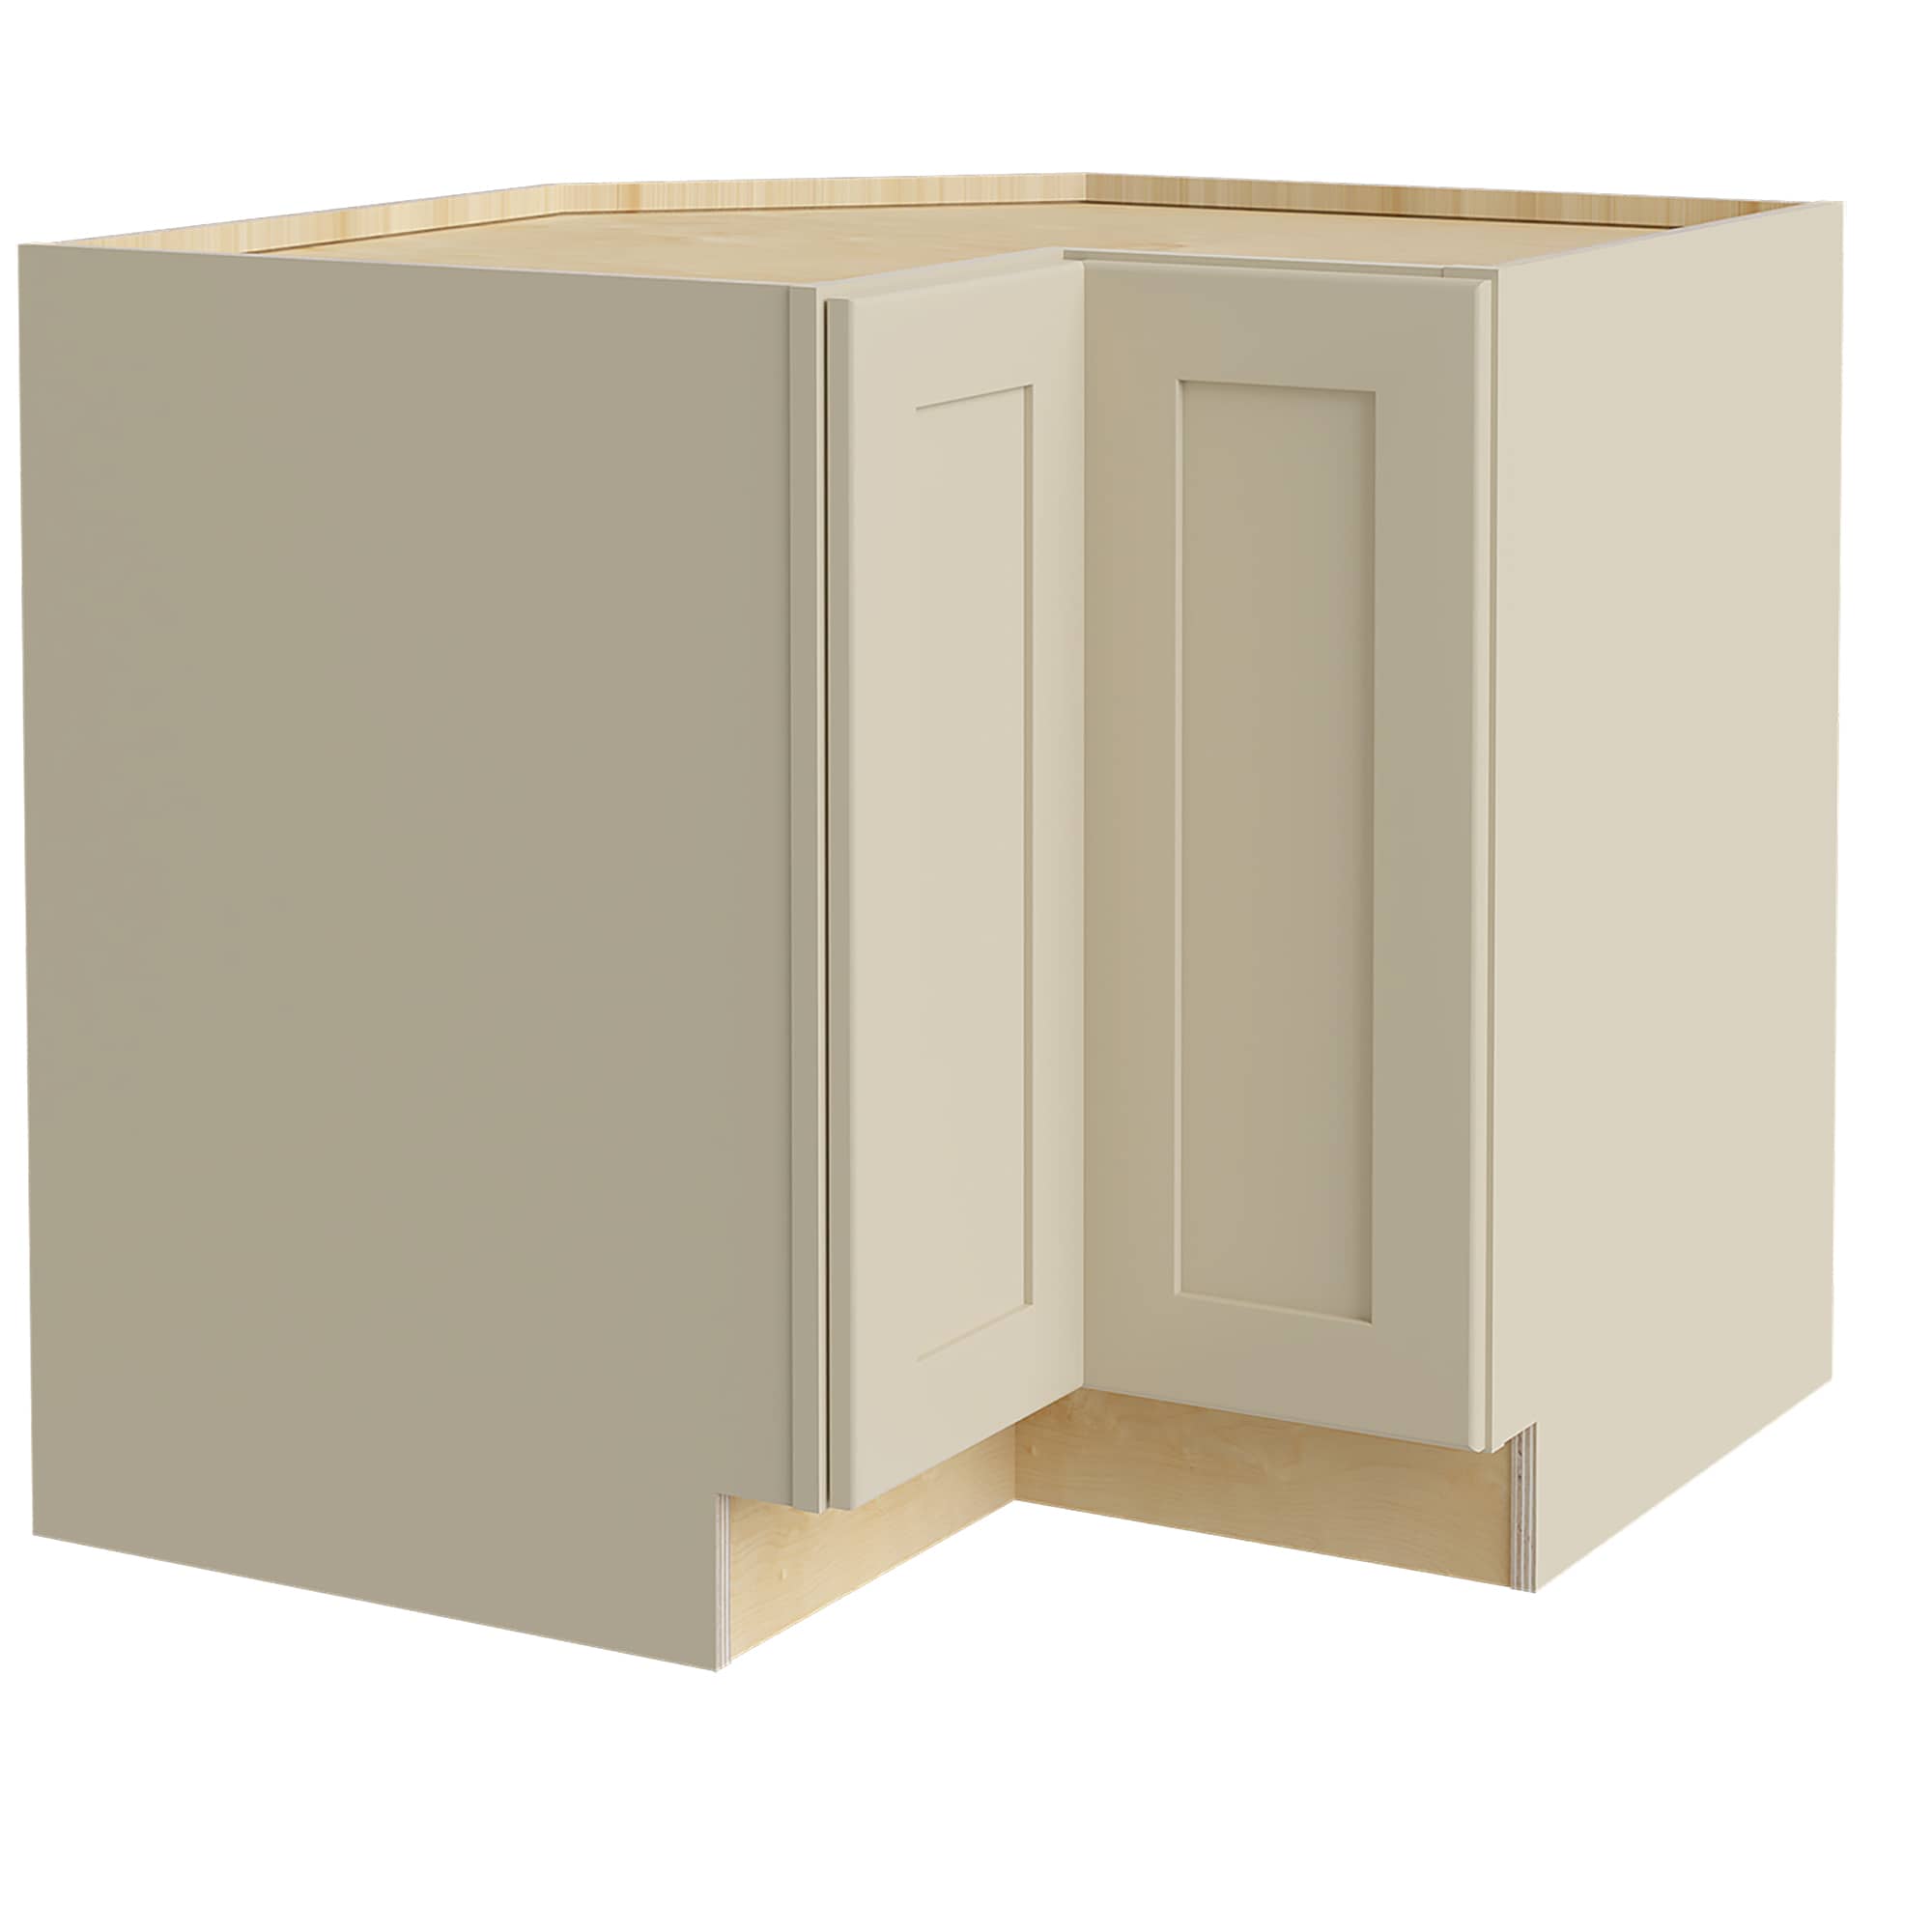 Luxxe Cabinetry 33-in W x 34.5-in H x 24-in D Norfolk Blended Cream Painted Corner Base Fully Assembled Semi-custom Cabinet in Off-White | EZR33L-NBC